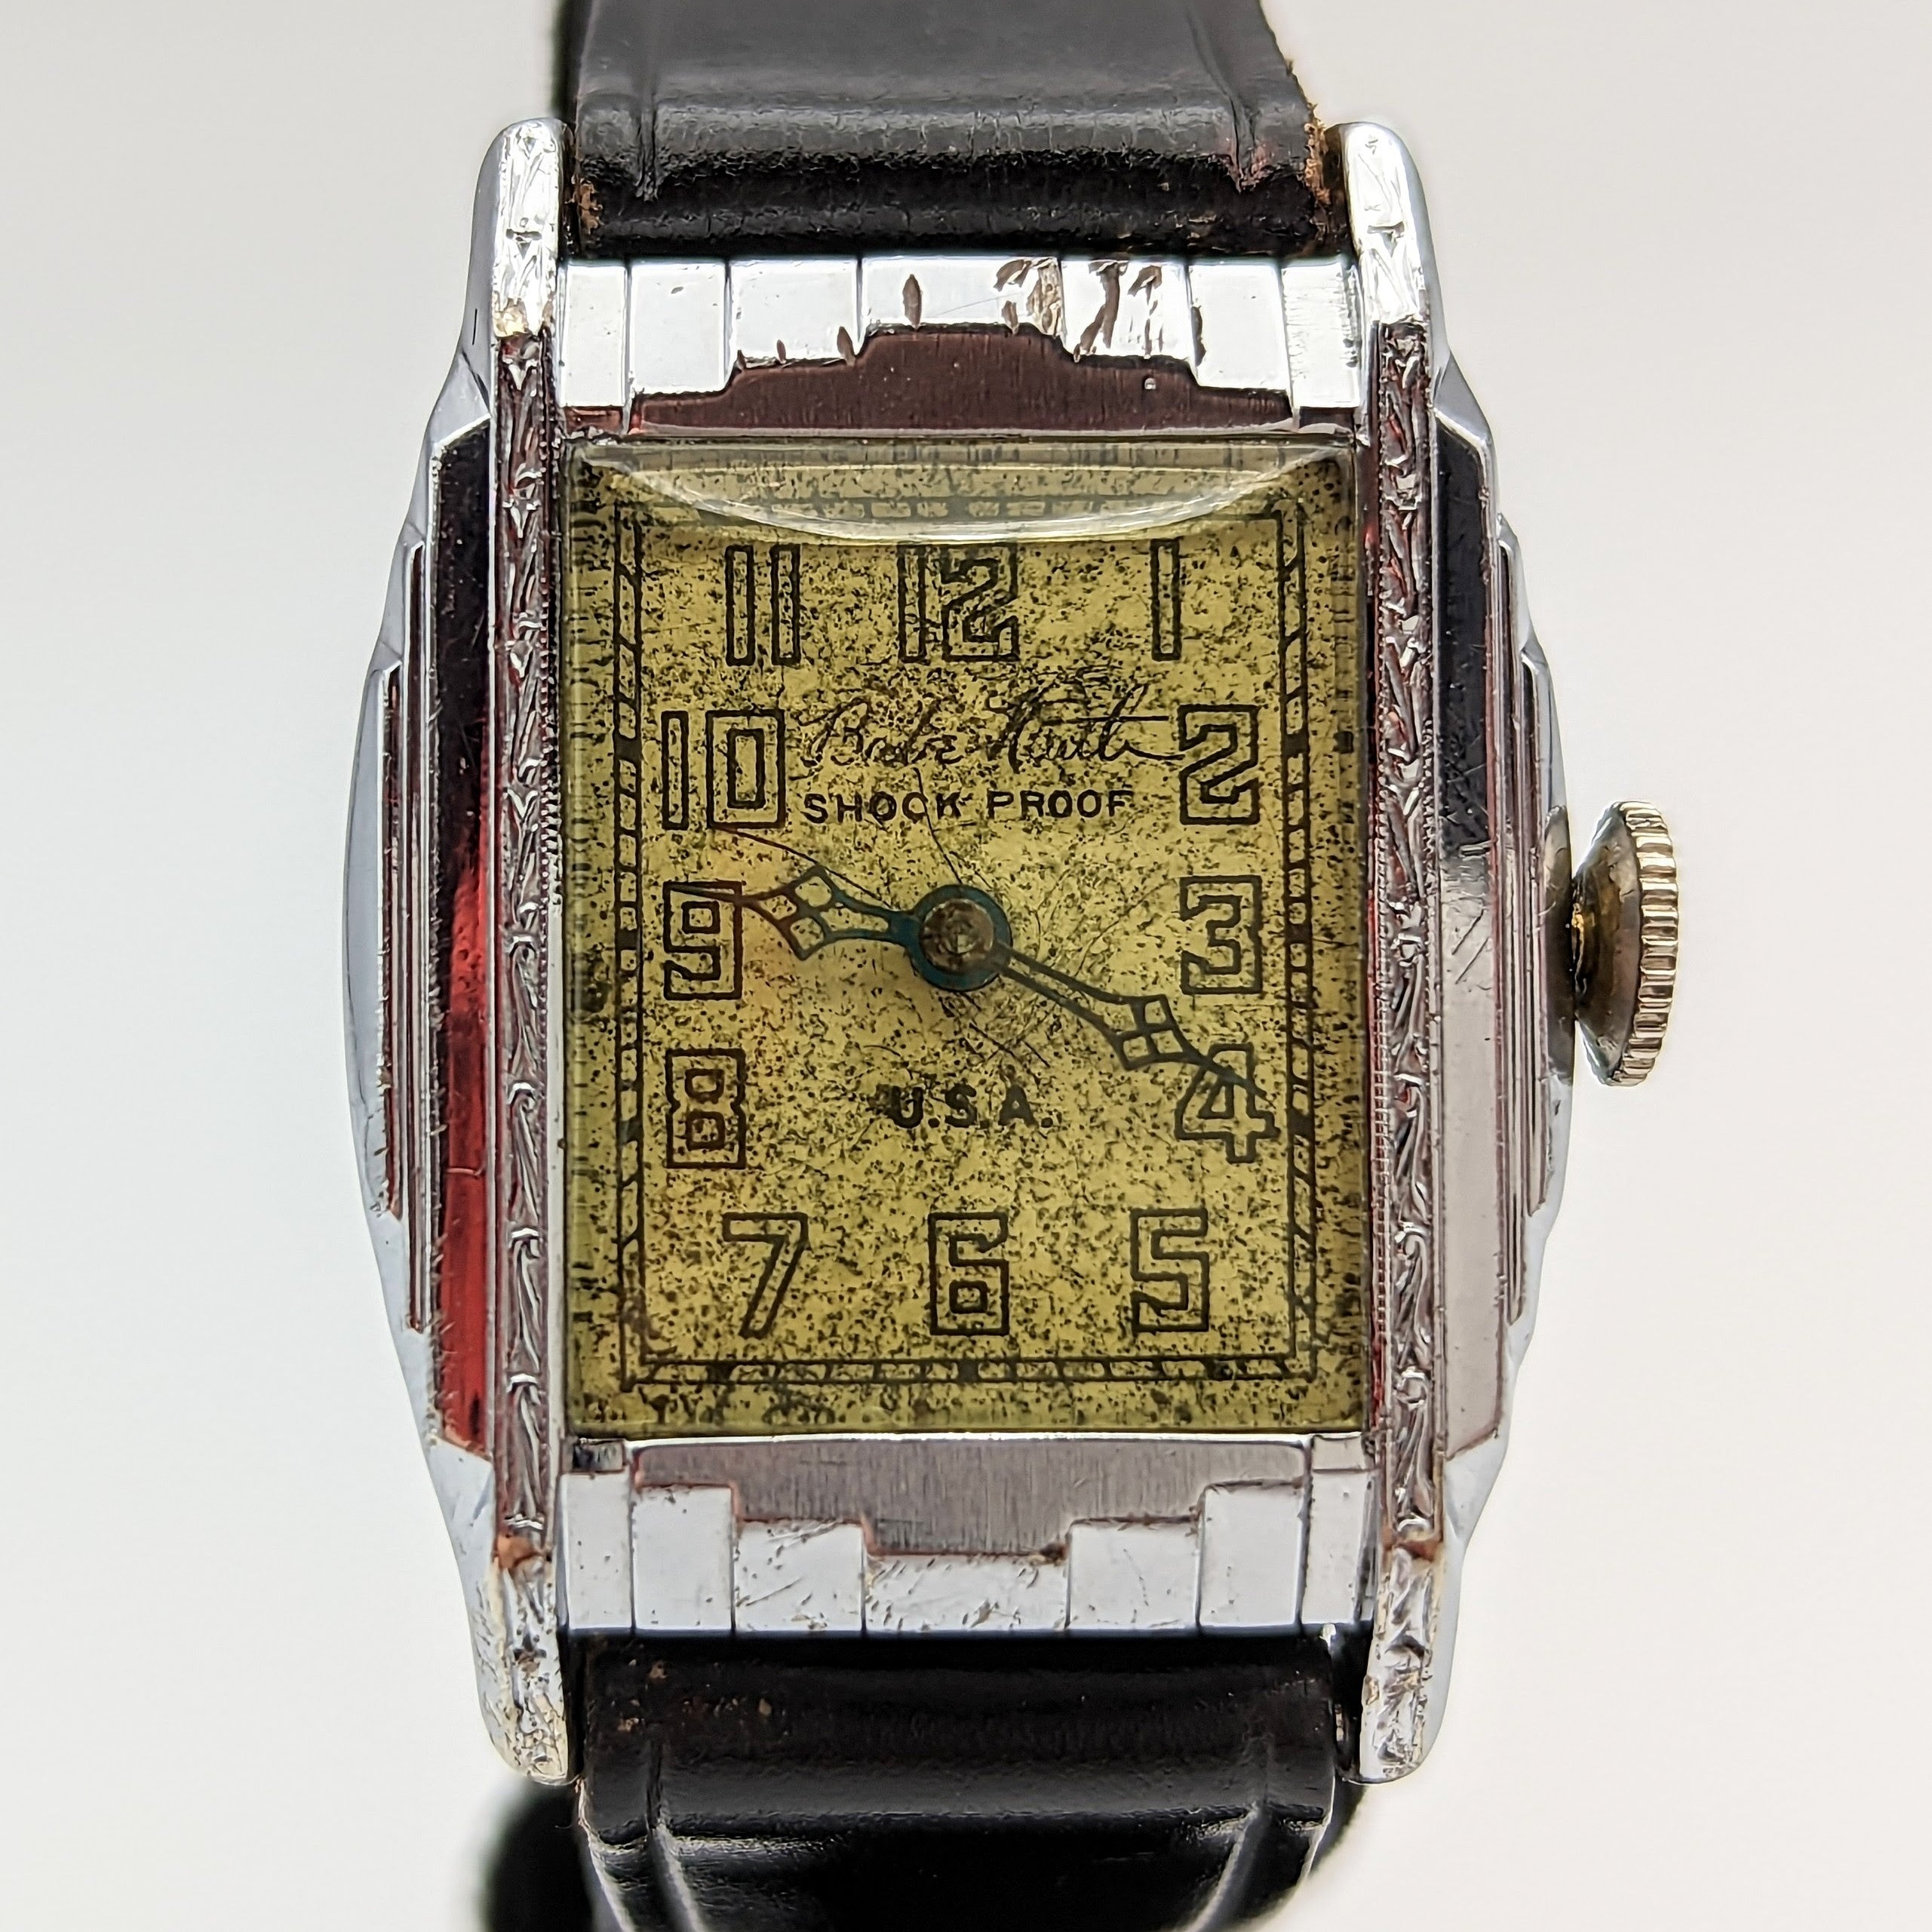 By BENRUS 1929 Babe Ruth Art Deco Wristwatch Shock Proof Adjusted 7 Jewels U.S.A. Watch